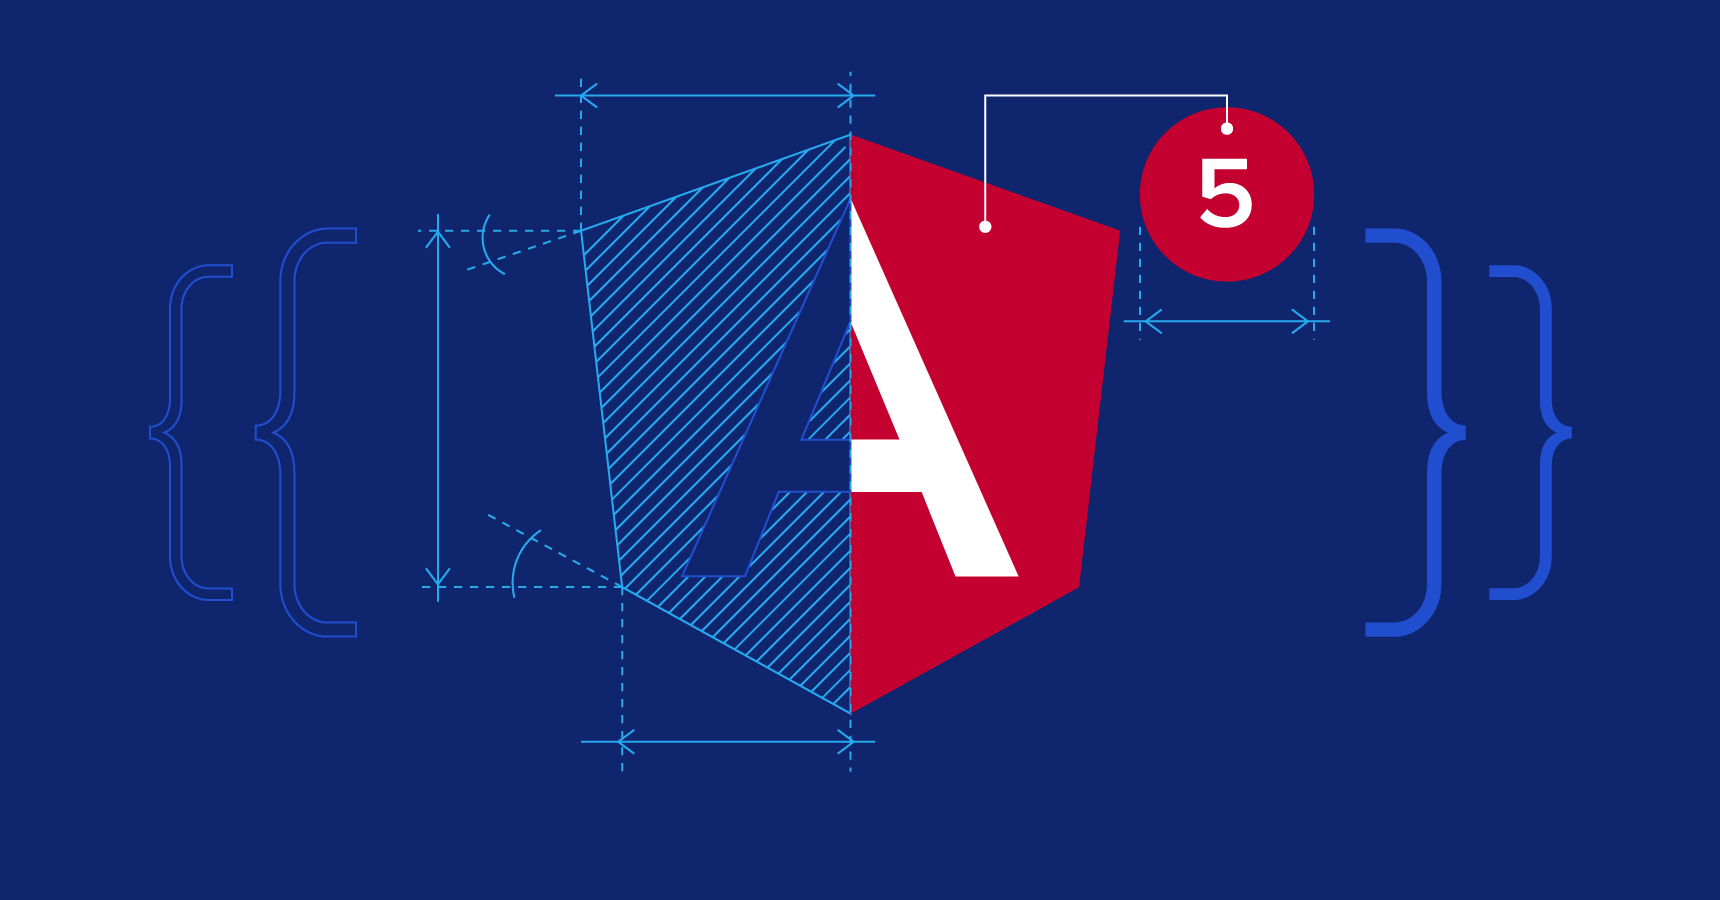 An Angular 5 教程: Step by Step Guide to Your First Angular 5 App